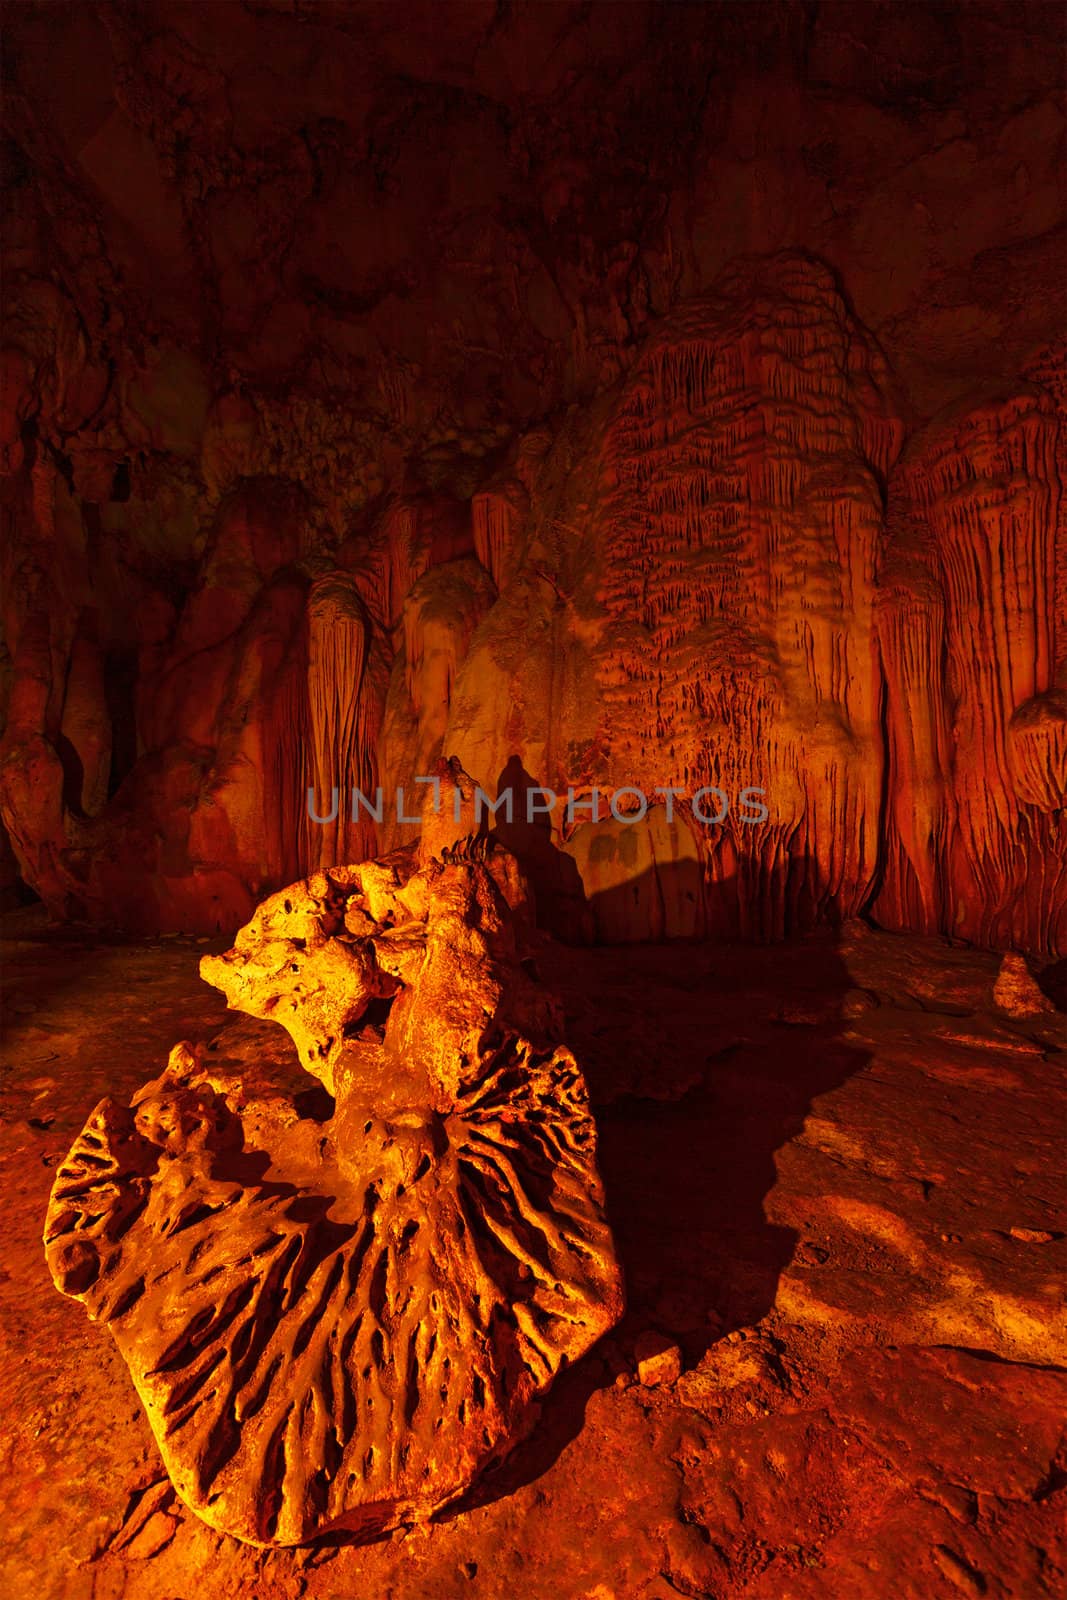 Stalagmite rock formations in cave. Chiang Dao, Thailand